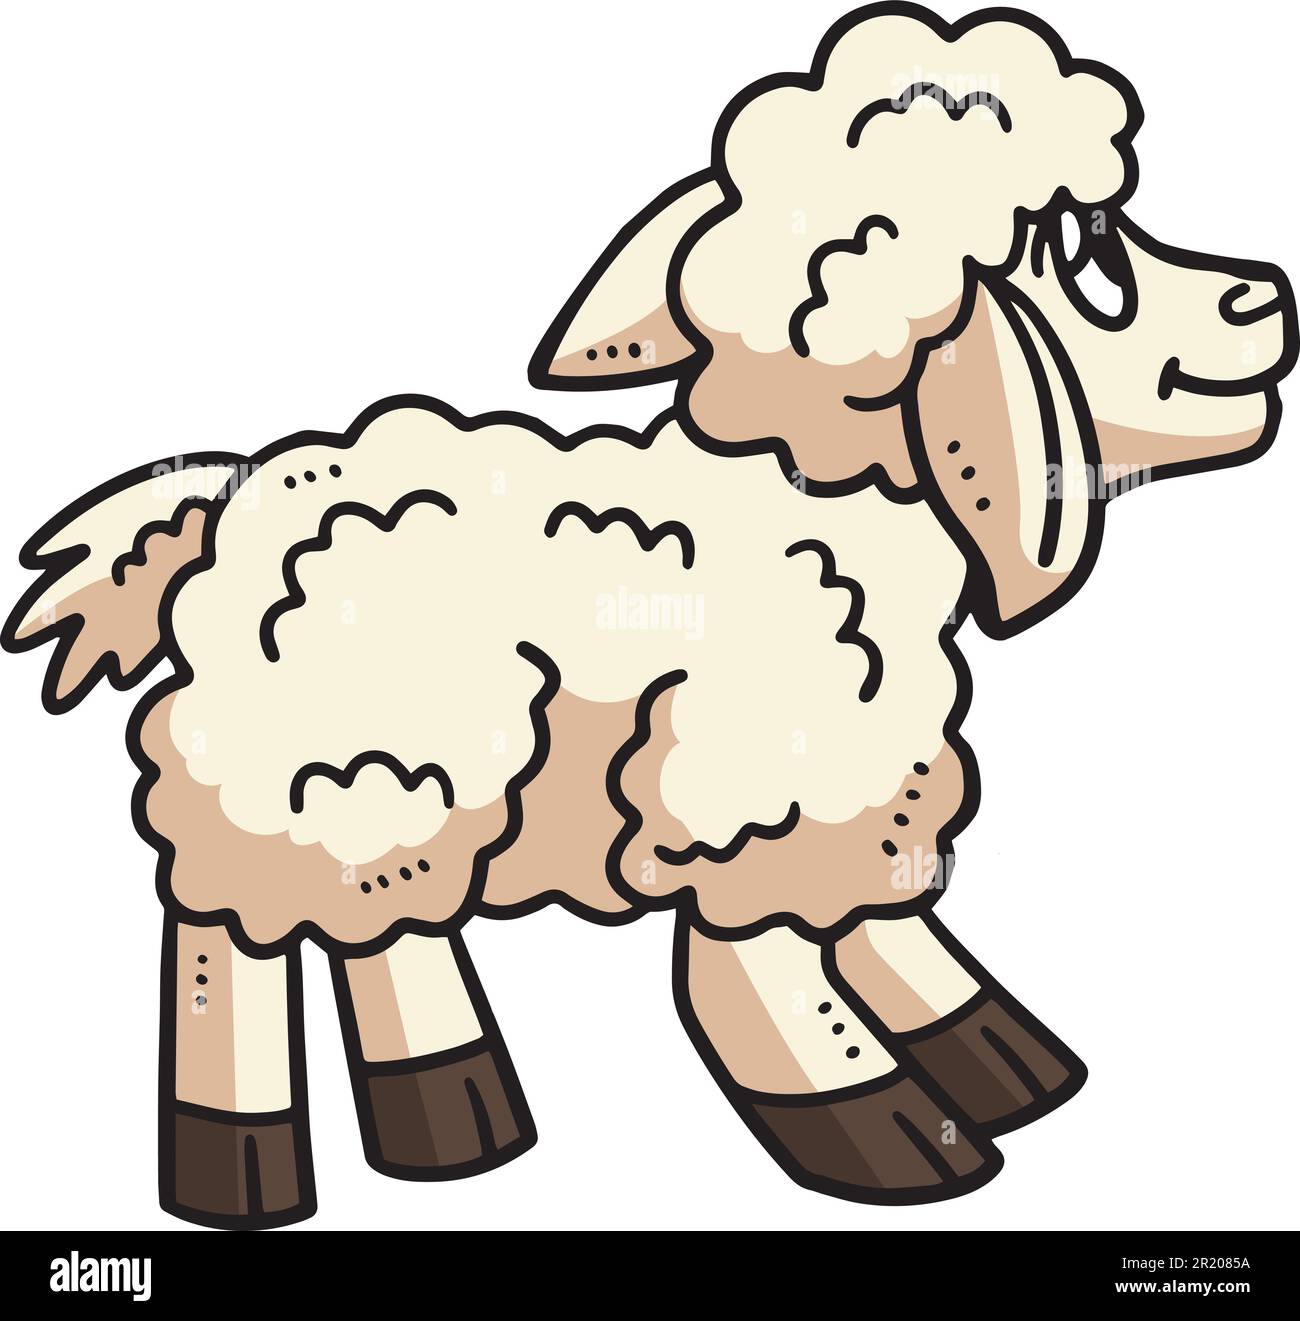 Baby Sheep Cartoon Colored Clipart Illustration Stock Vector